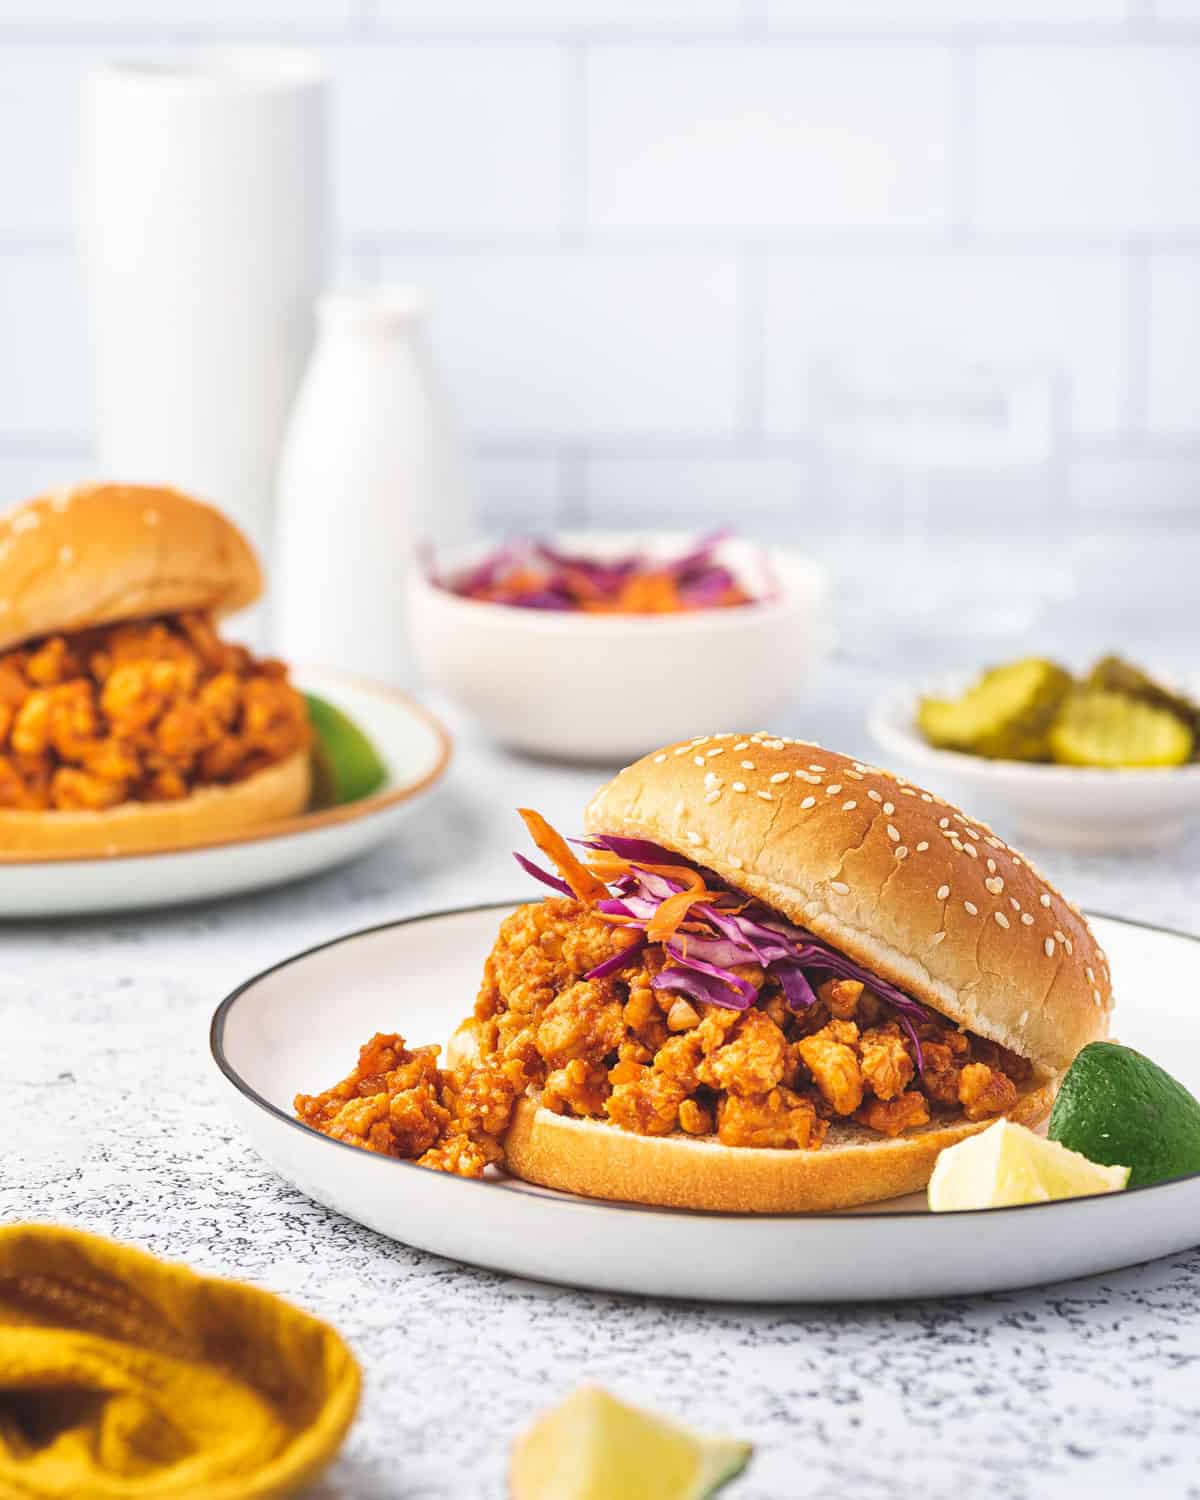 A plate of sloppy joes with ground chicken in a burger bun.